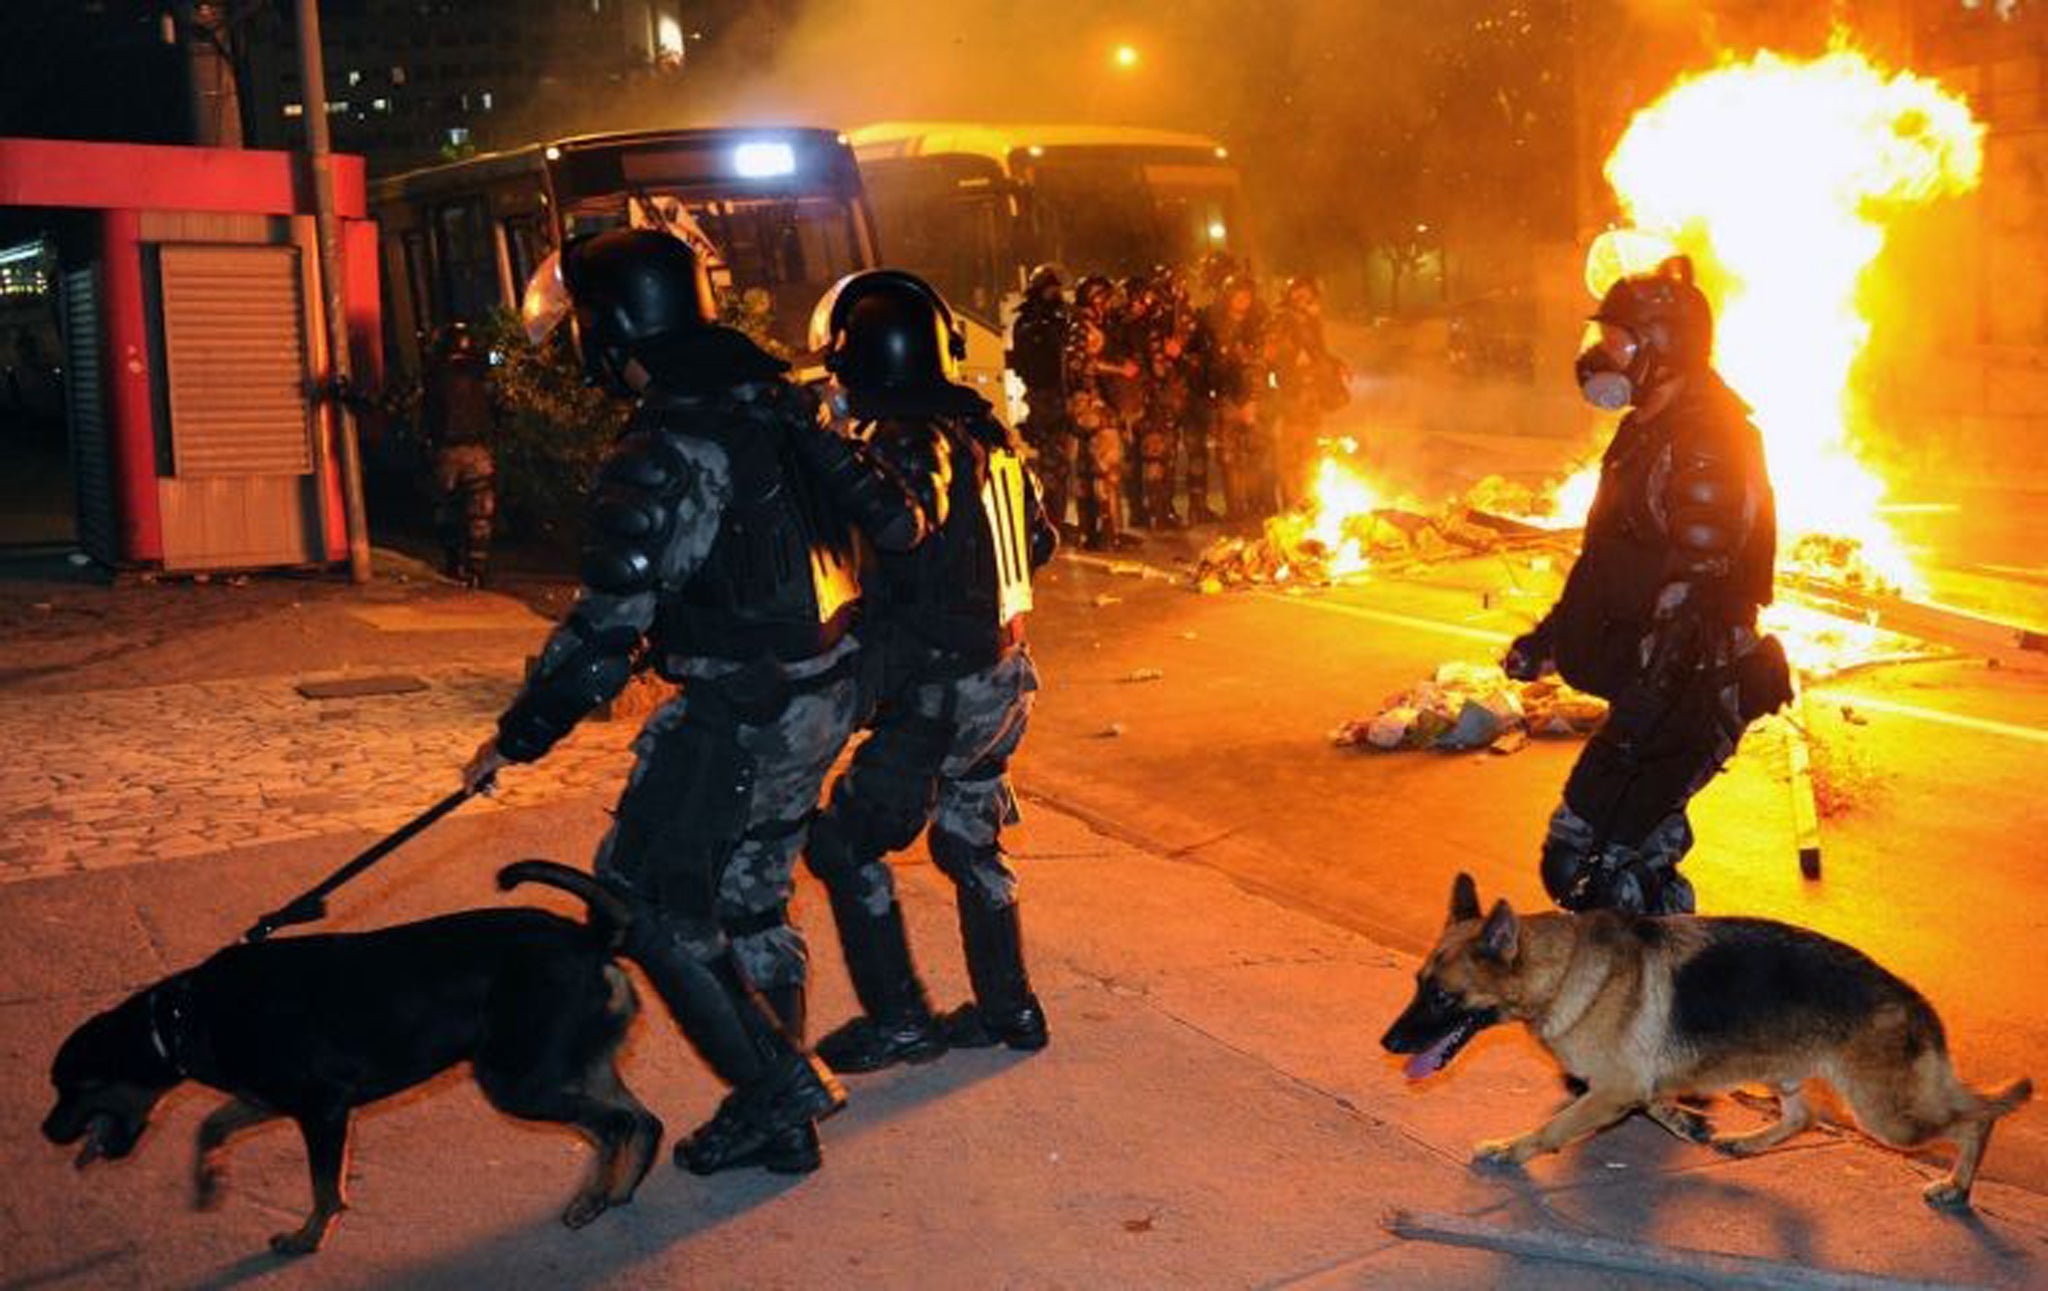 Incident comes after the recent civil unrest during the Confederations Cup